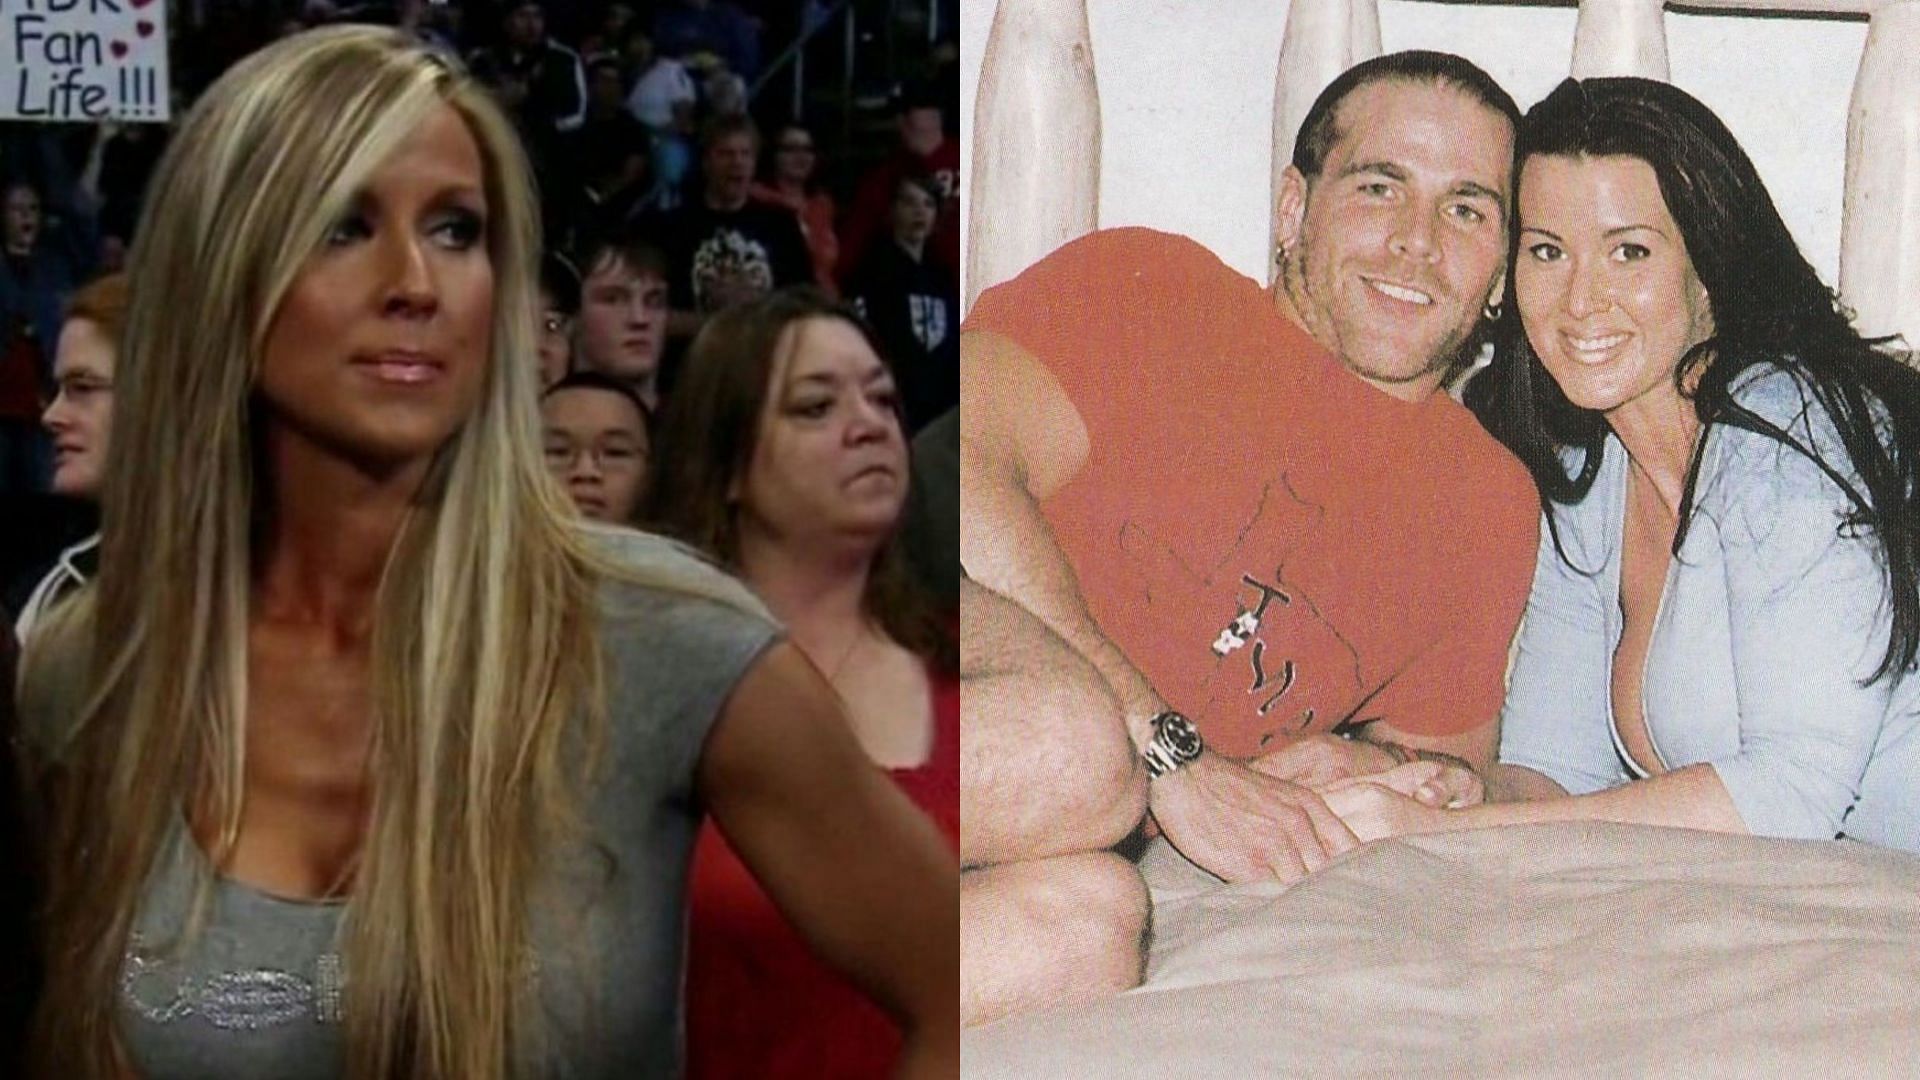 7 things you didn't know about Shawn Michaels and Rebecca Curci's